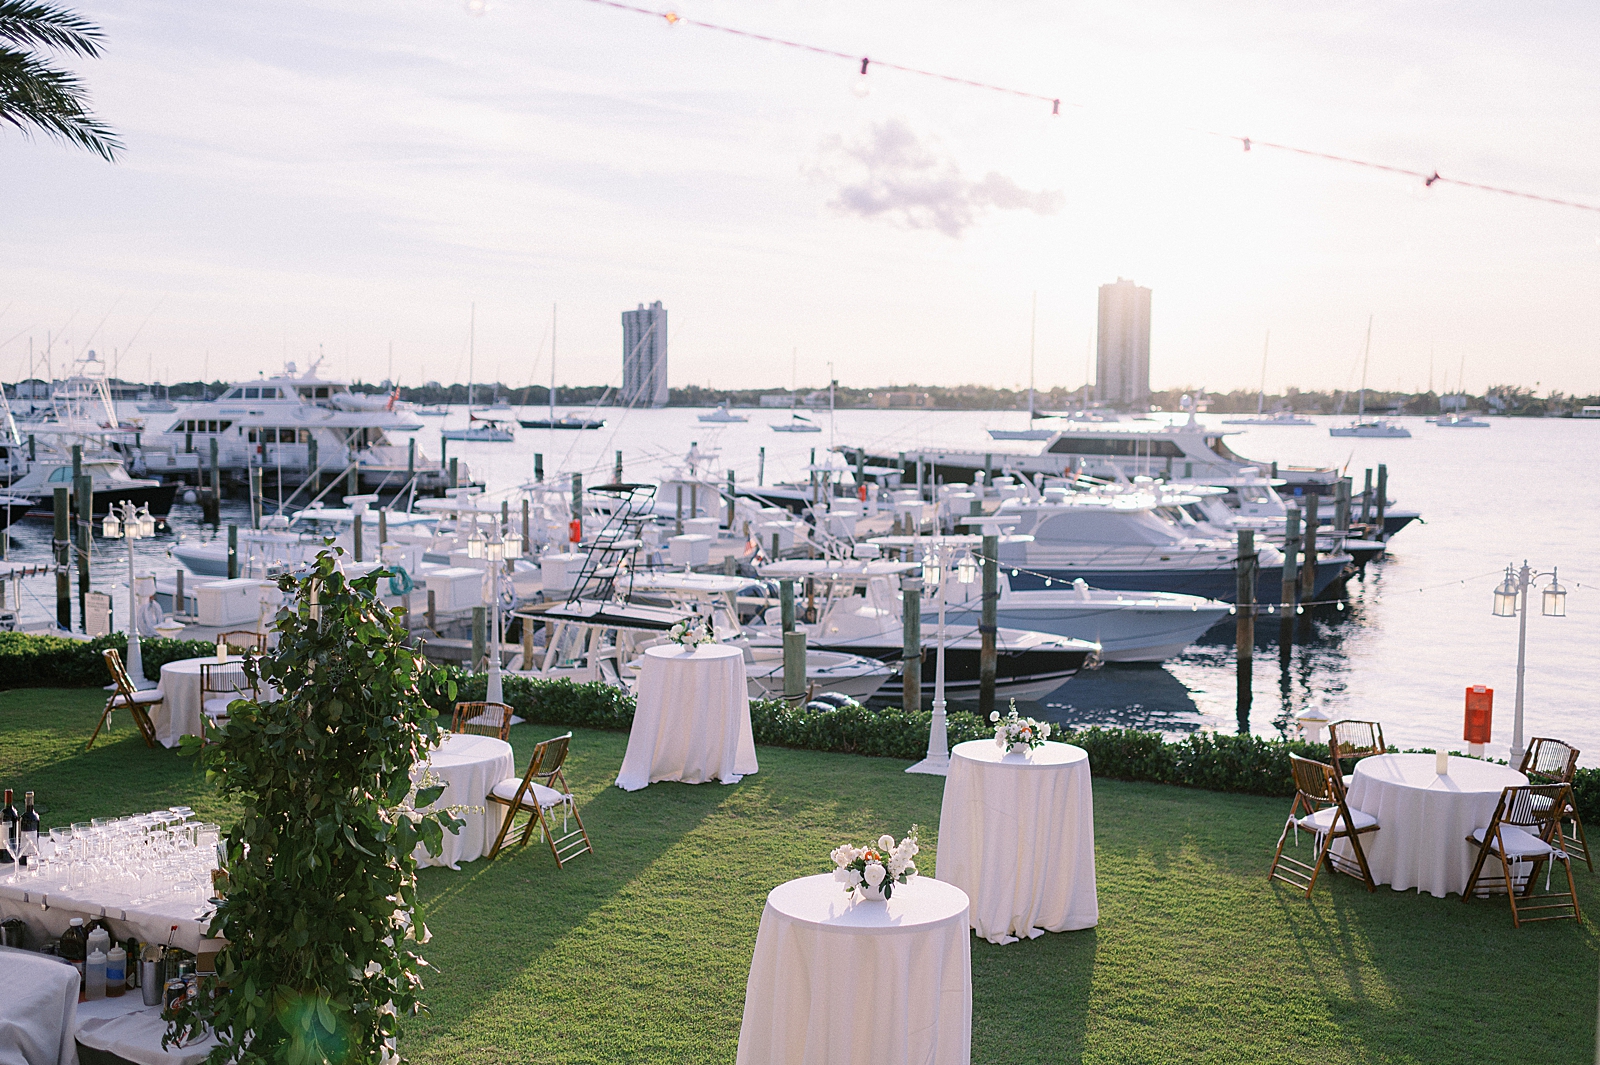 Detail shot of tables setup by yachts 